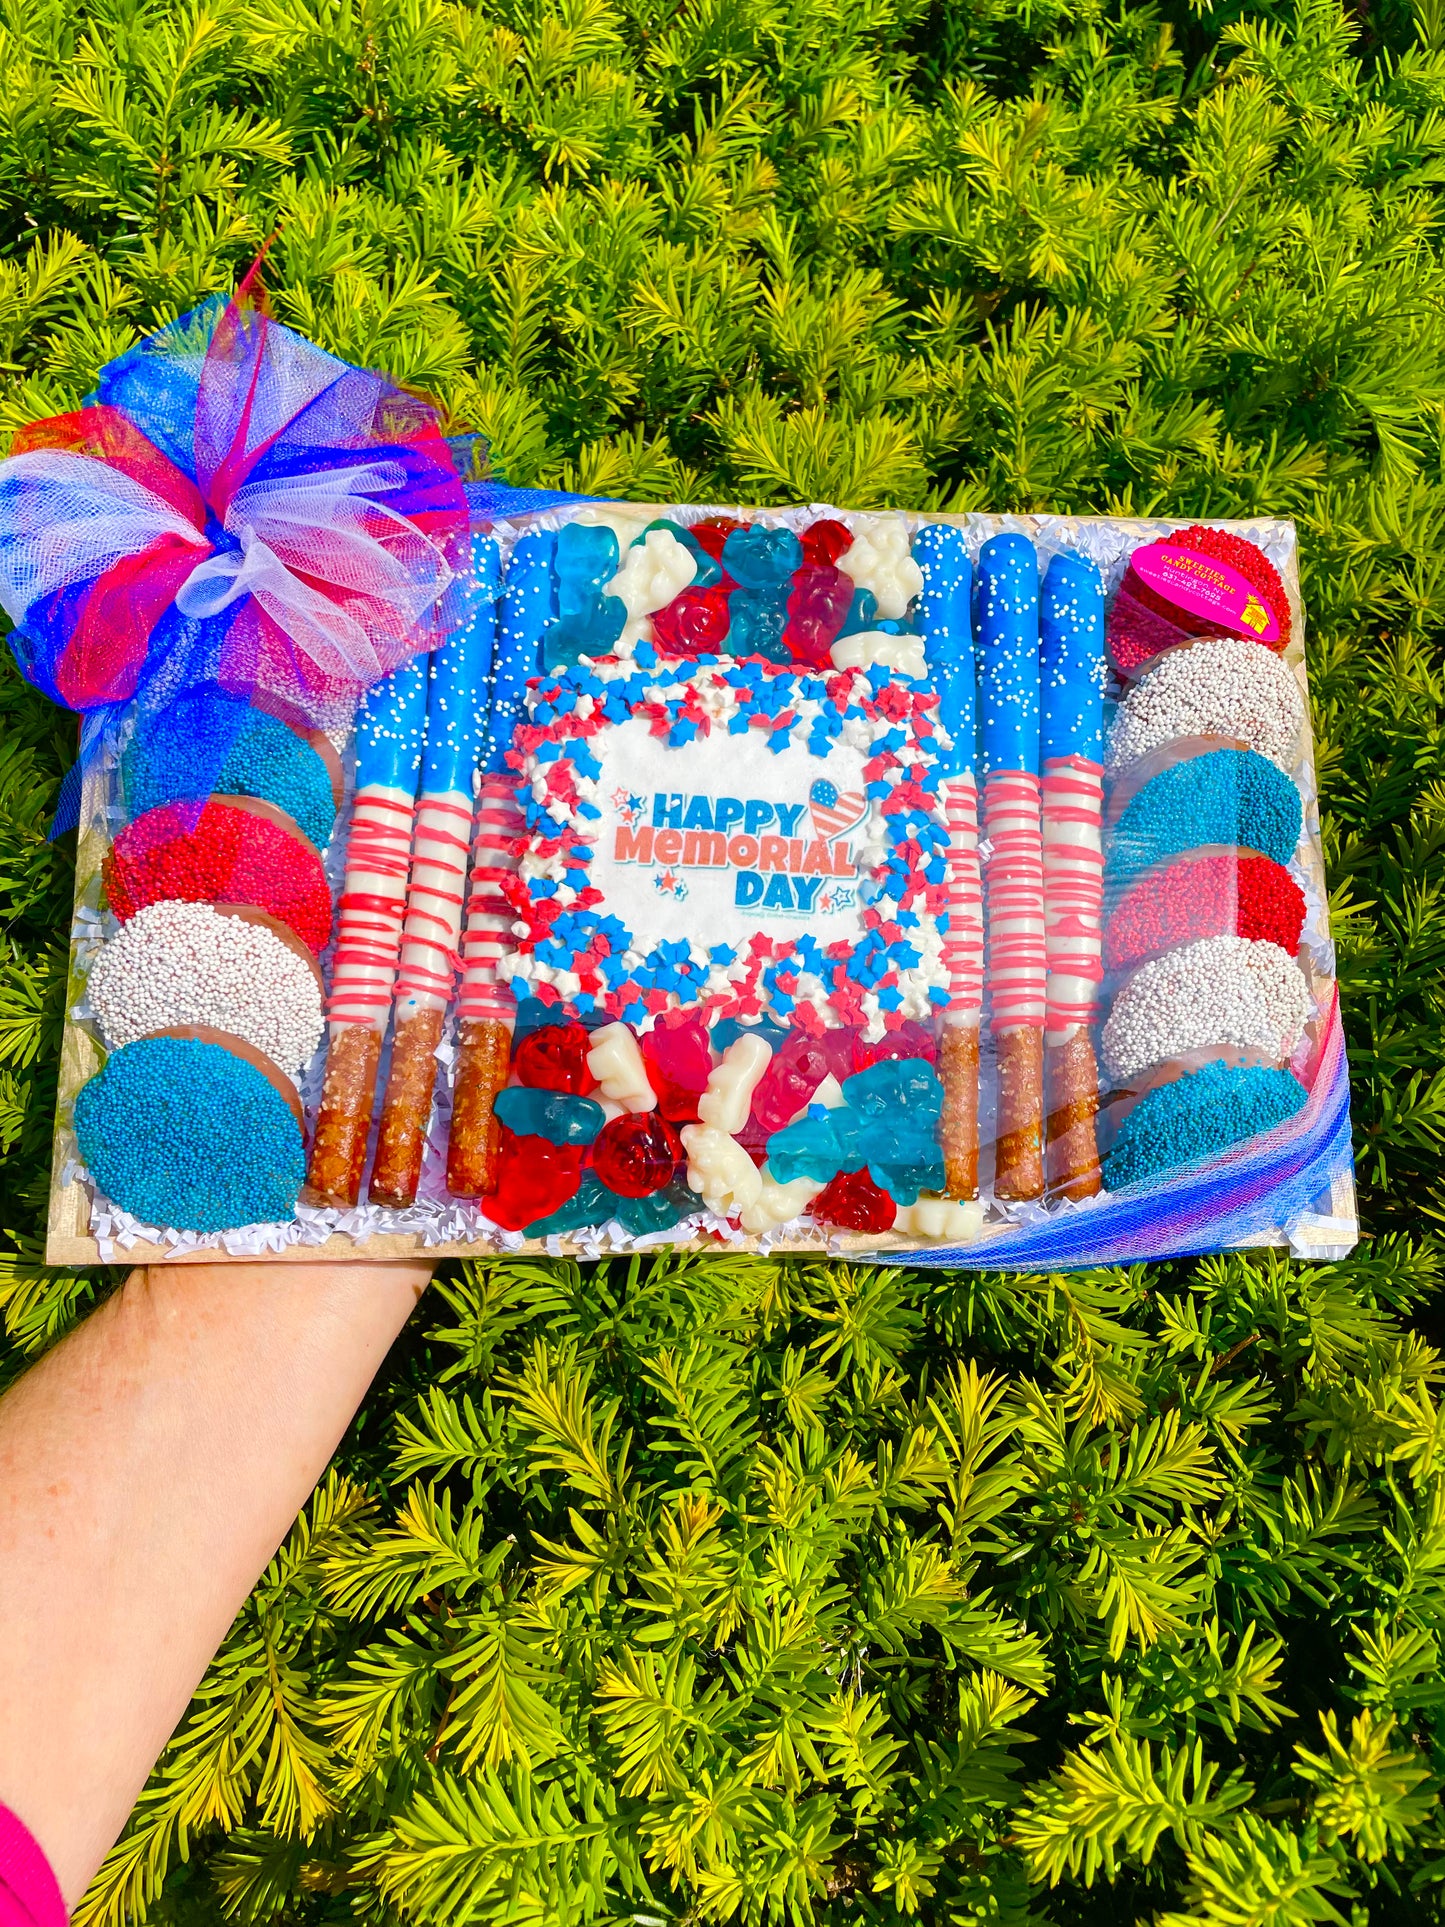 Red, White & Blue Favorites Platter - Sweeties Candy Cottage